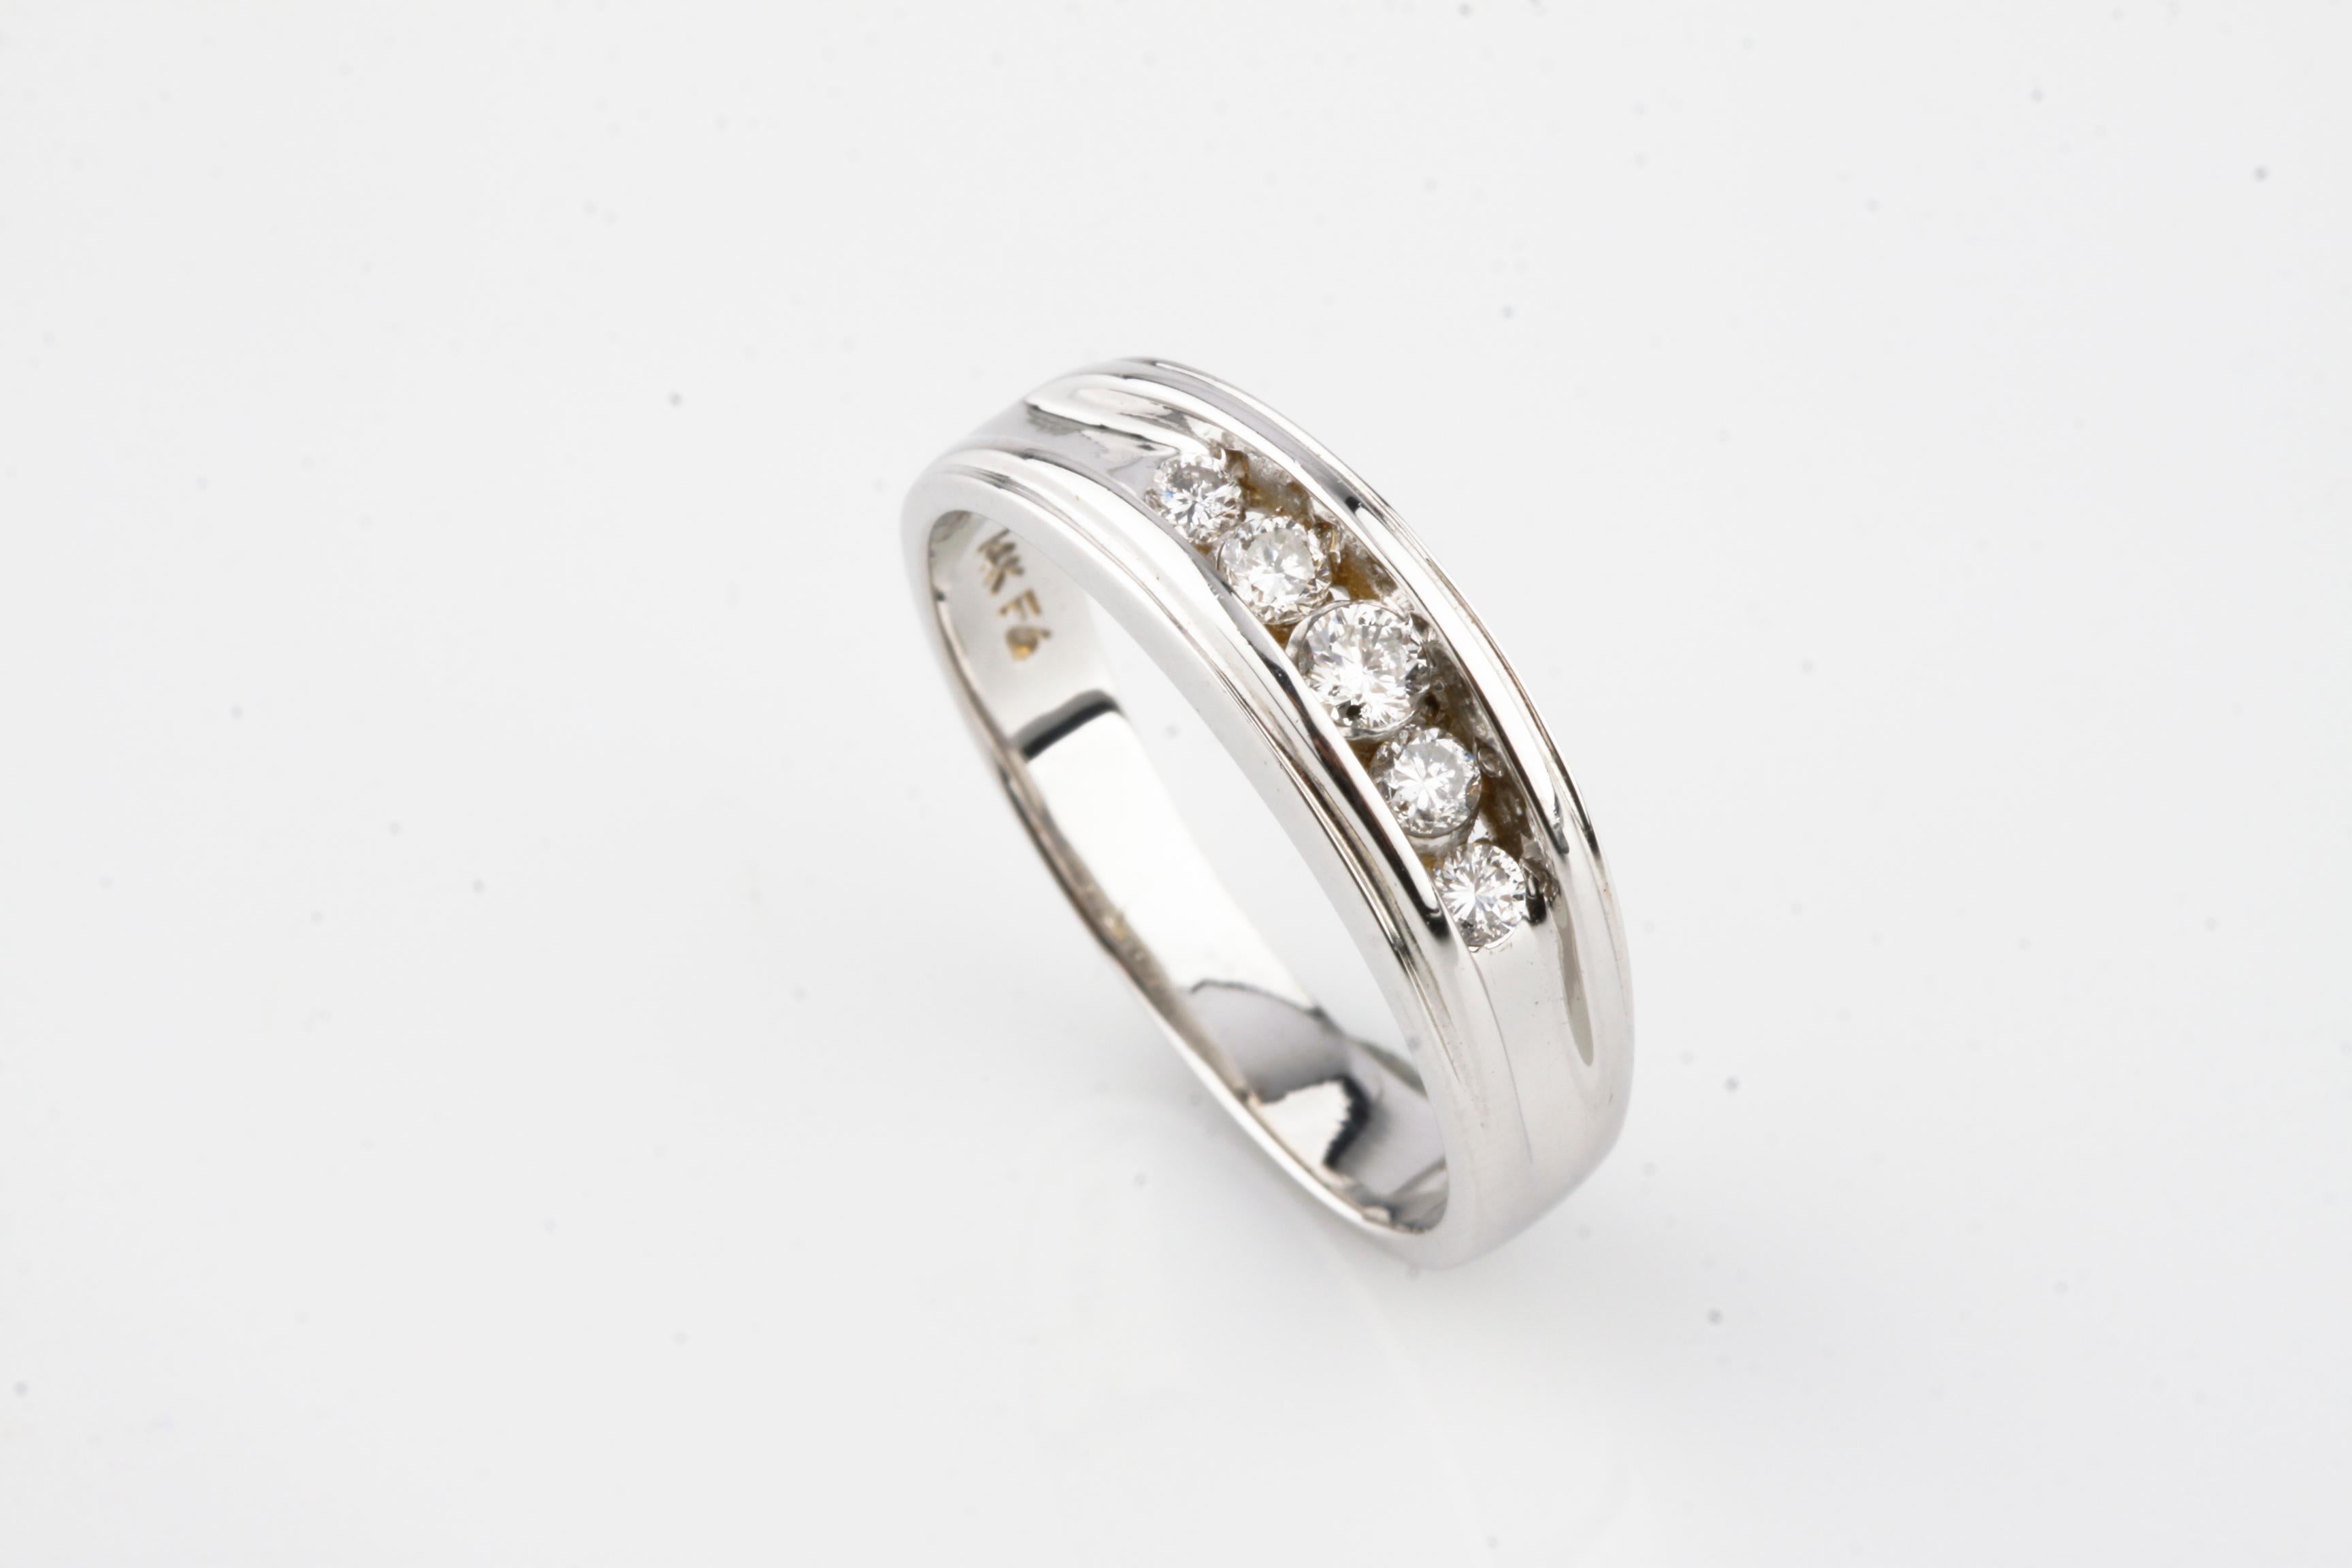 Gorgeous Unique Band Ring
Features Five Round Channel Set Diamonds
Diamonds Are Set in Terraced Layers, Creating a Shadowbox Effect
Total Diamond Weight = Approximately 0.30 Cts
Average Color = H - I
Average Clarity = SI
Size 9.25
Total Mass = 5.0